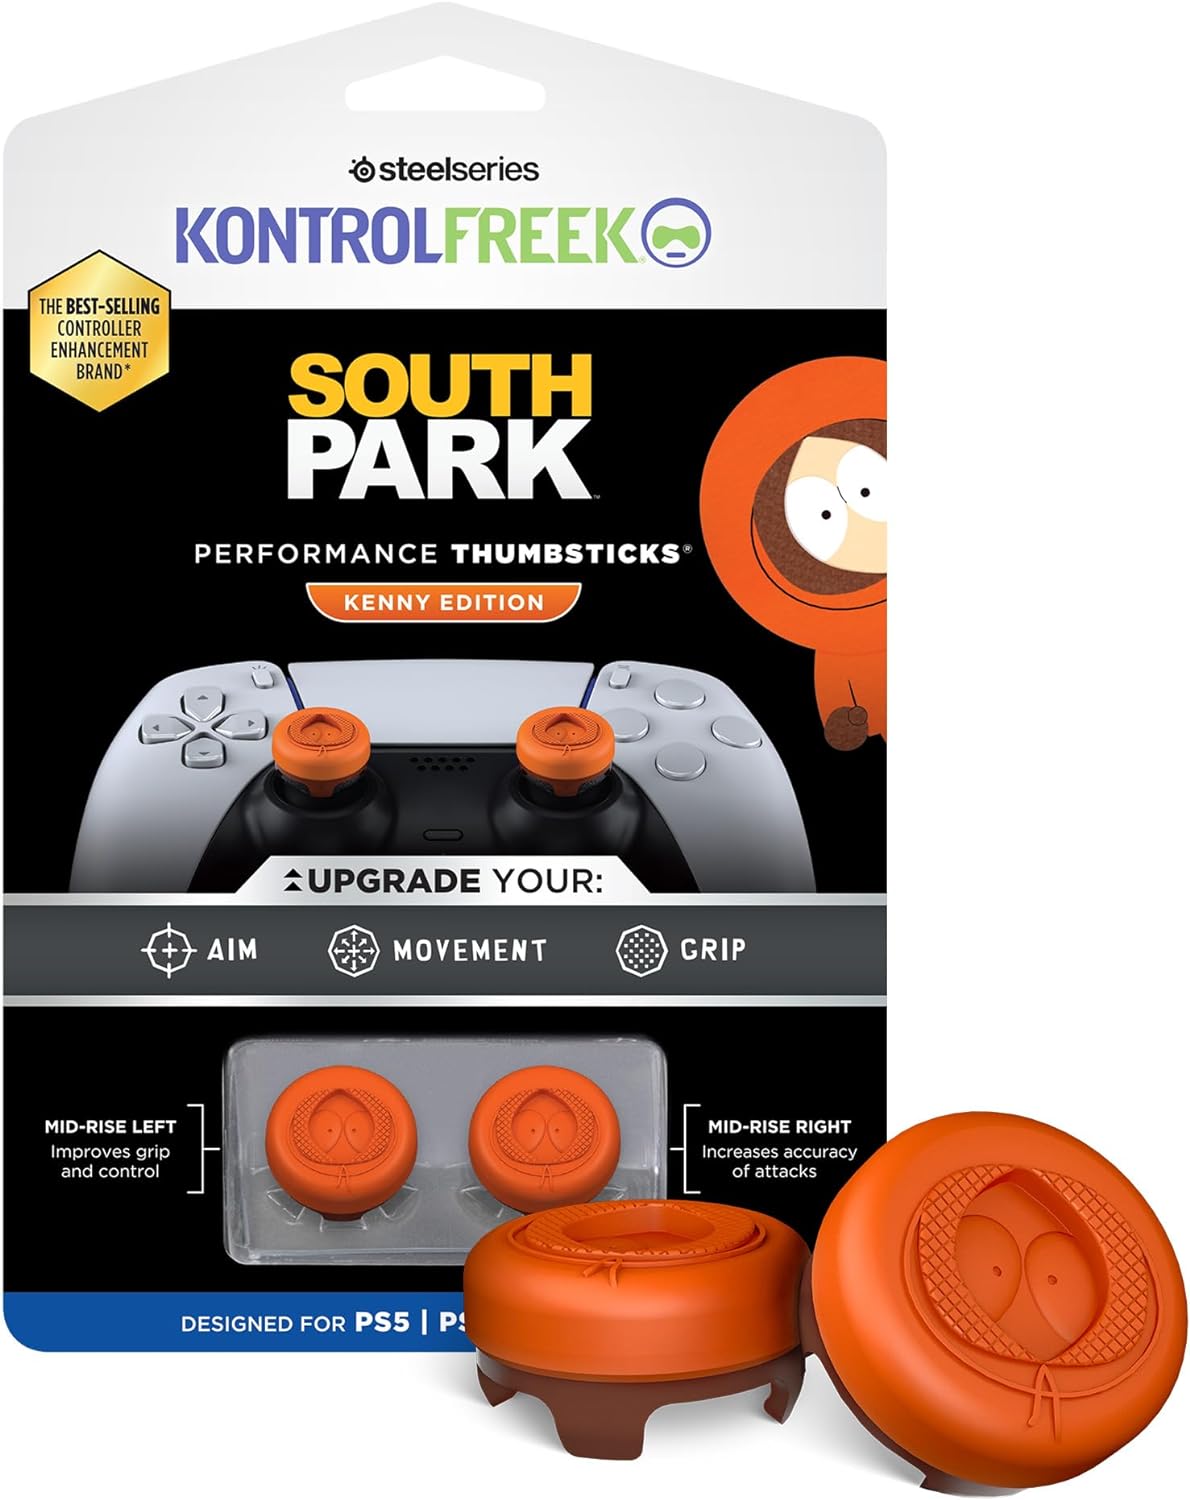 KontrolFreek South Park: Kenny Edition Performance Thumbsticks for Playstation 4 (PS4) and Playstation 5 (PS5) Controller | Mid-Rise, Concave | Orange